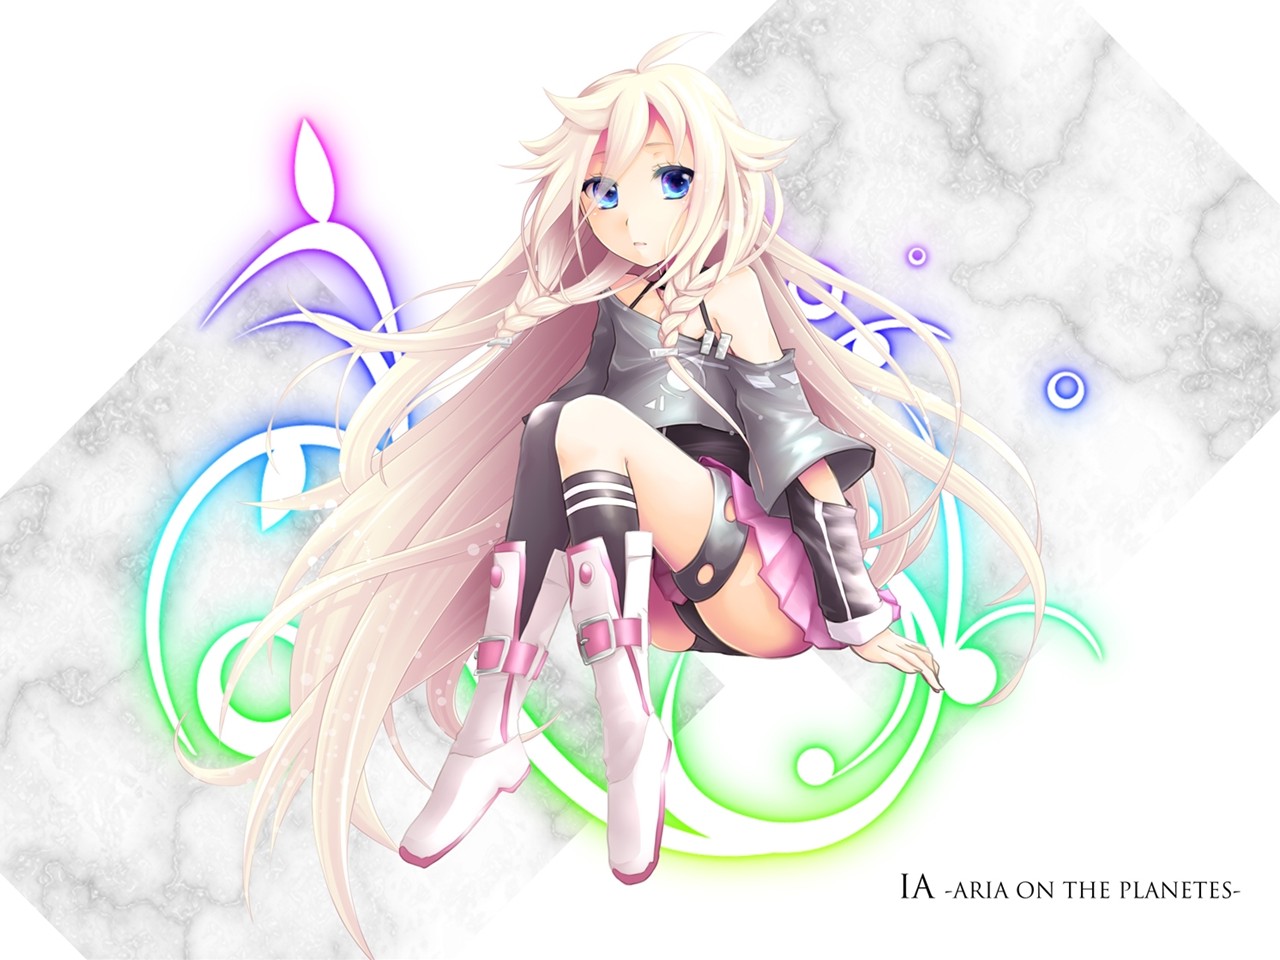 Ia 壁紙no 4 6 Vocaloid ボーカロイド 壁紙家